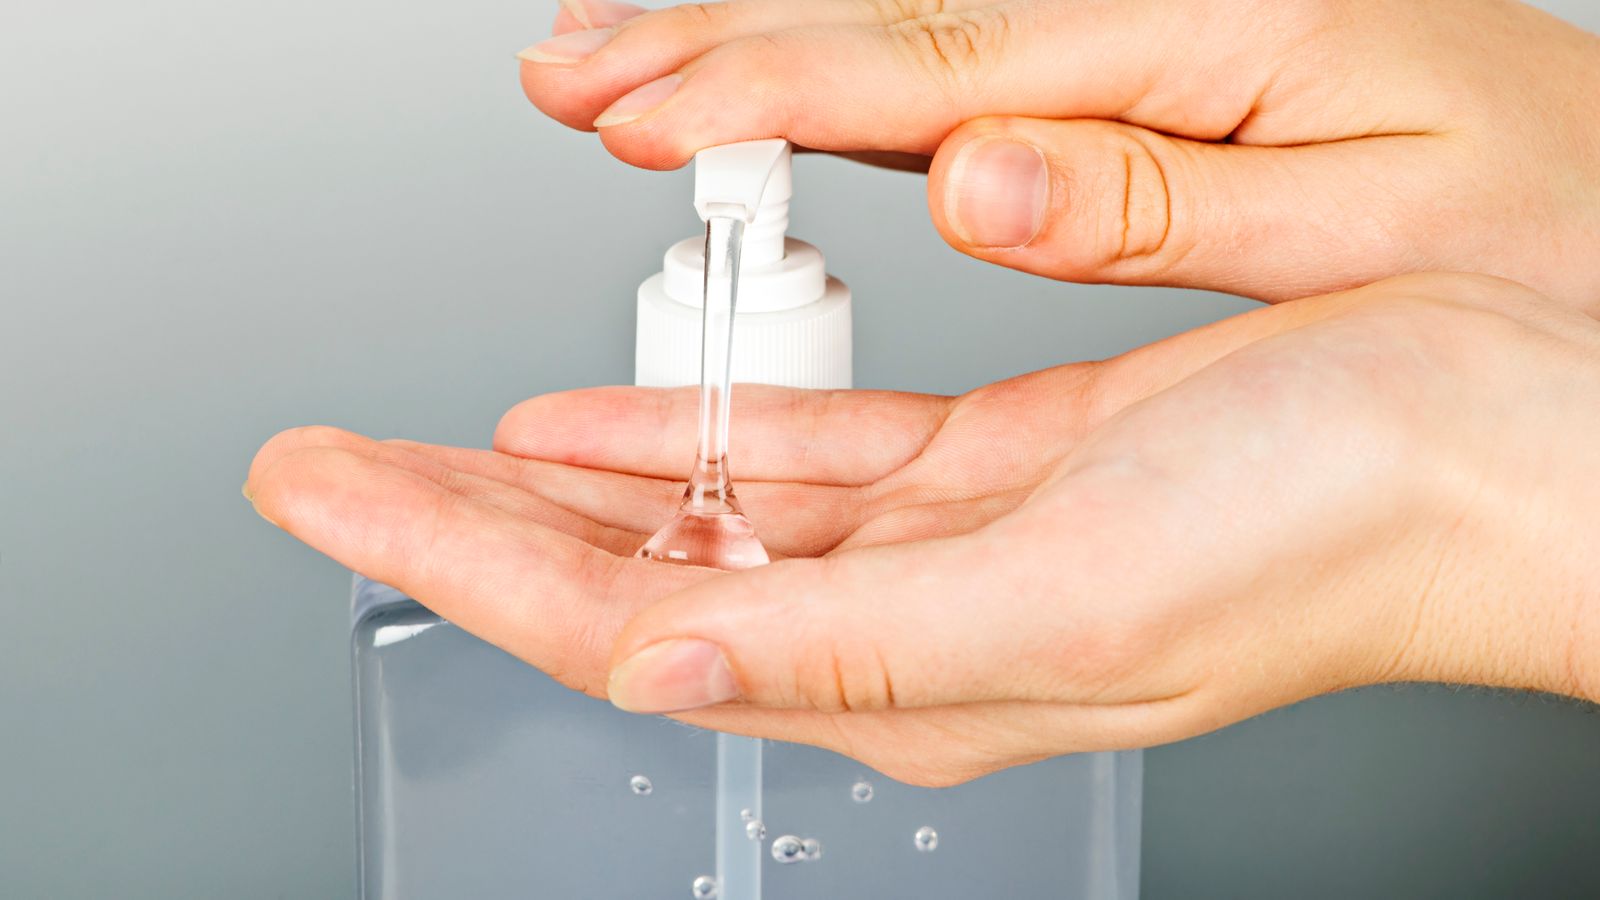 A person pumping hand sanitizer from a dispense onto their hands.